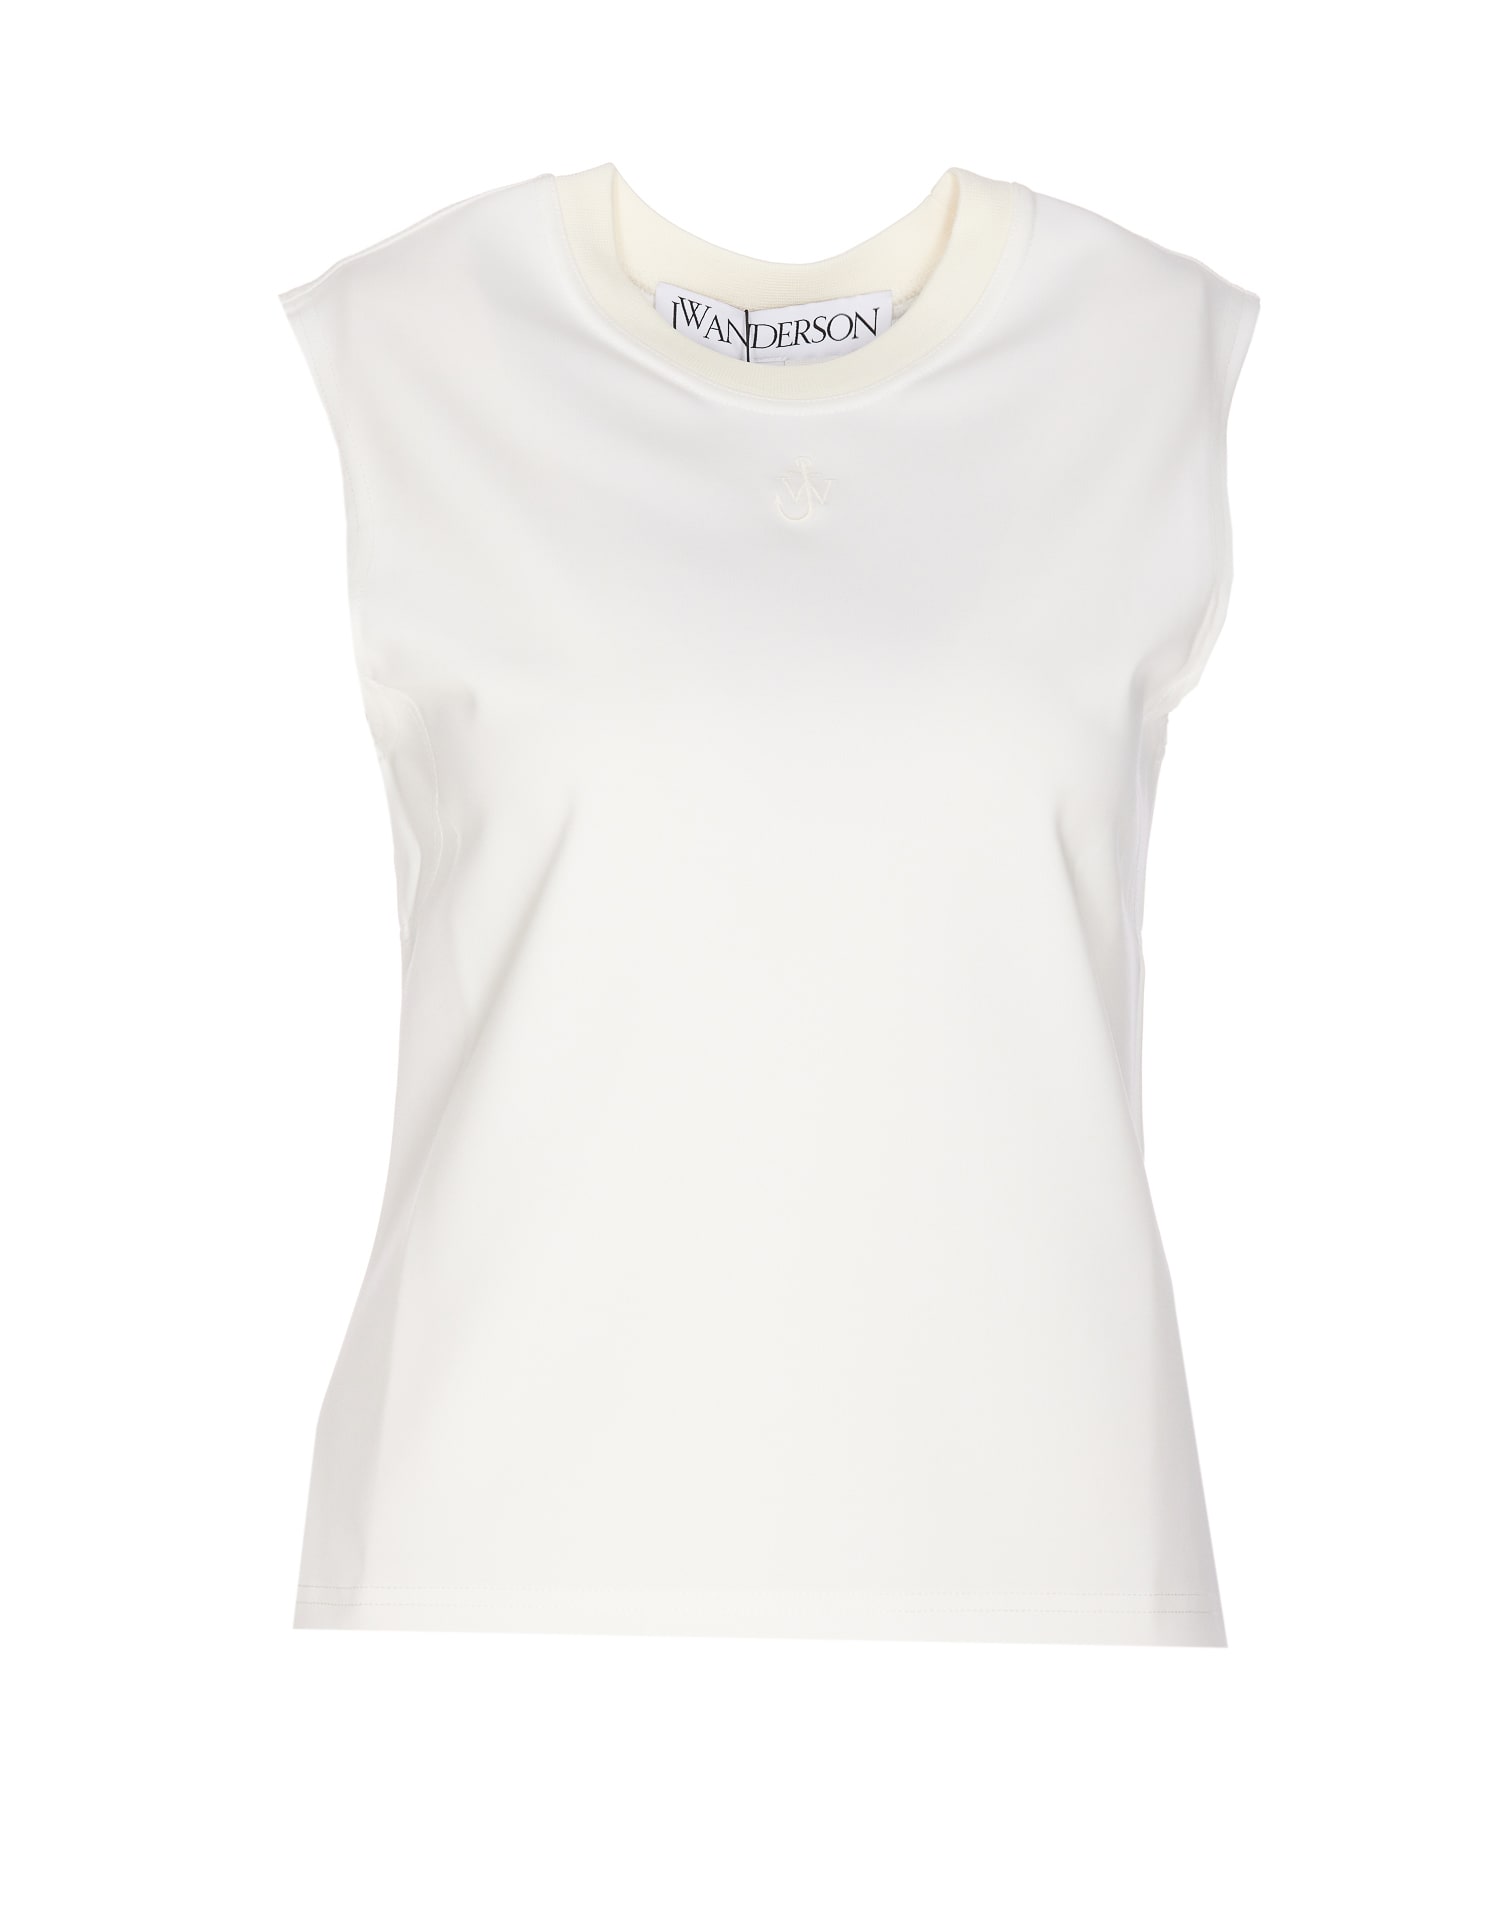 J.W. Anderson Embroidered Jwa Logo Tank Top